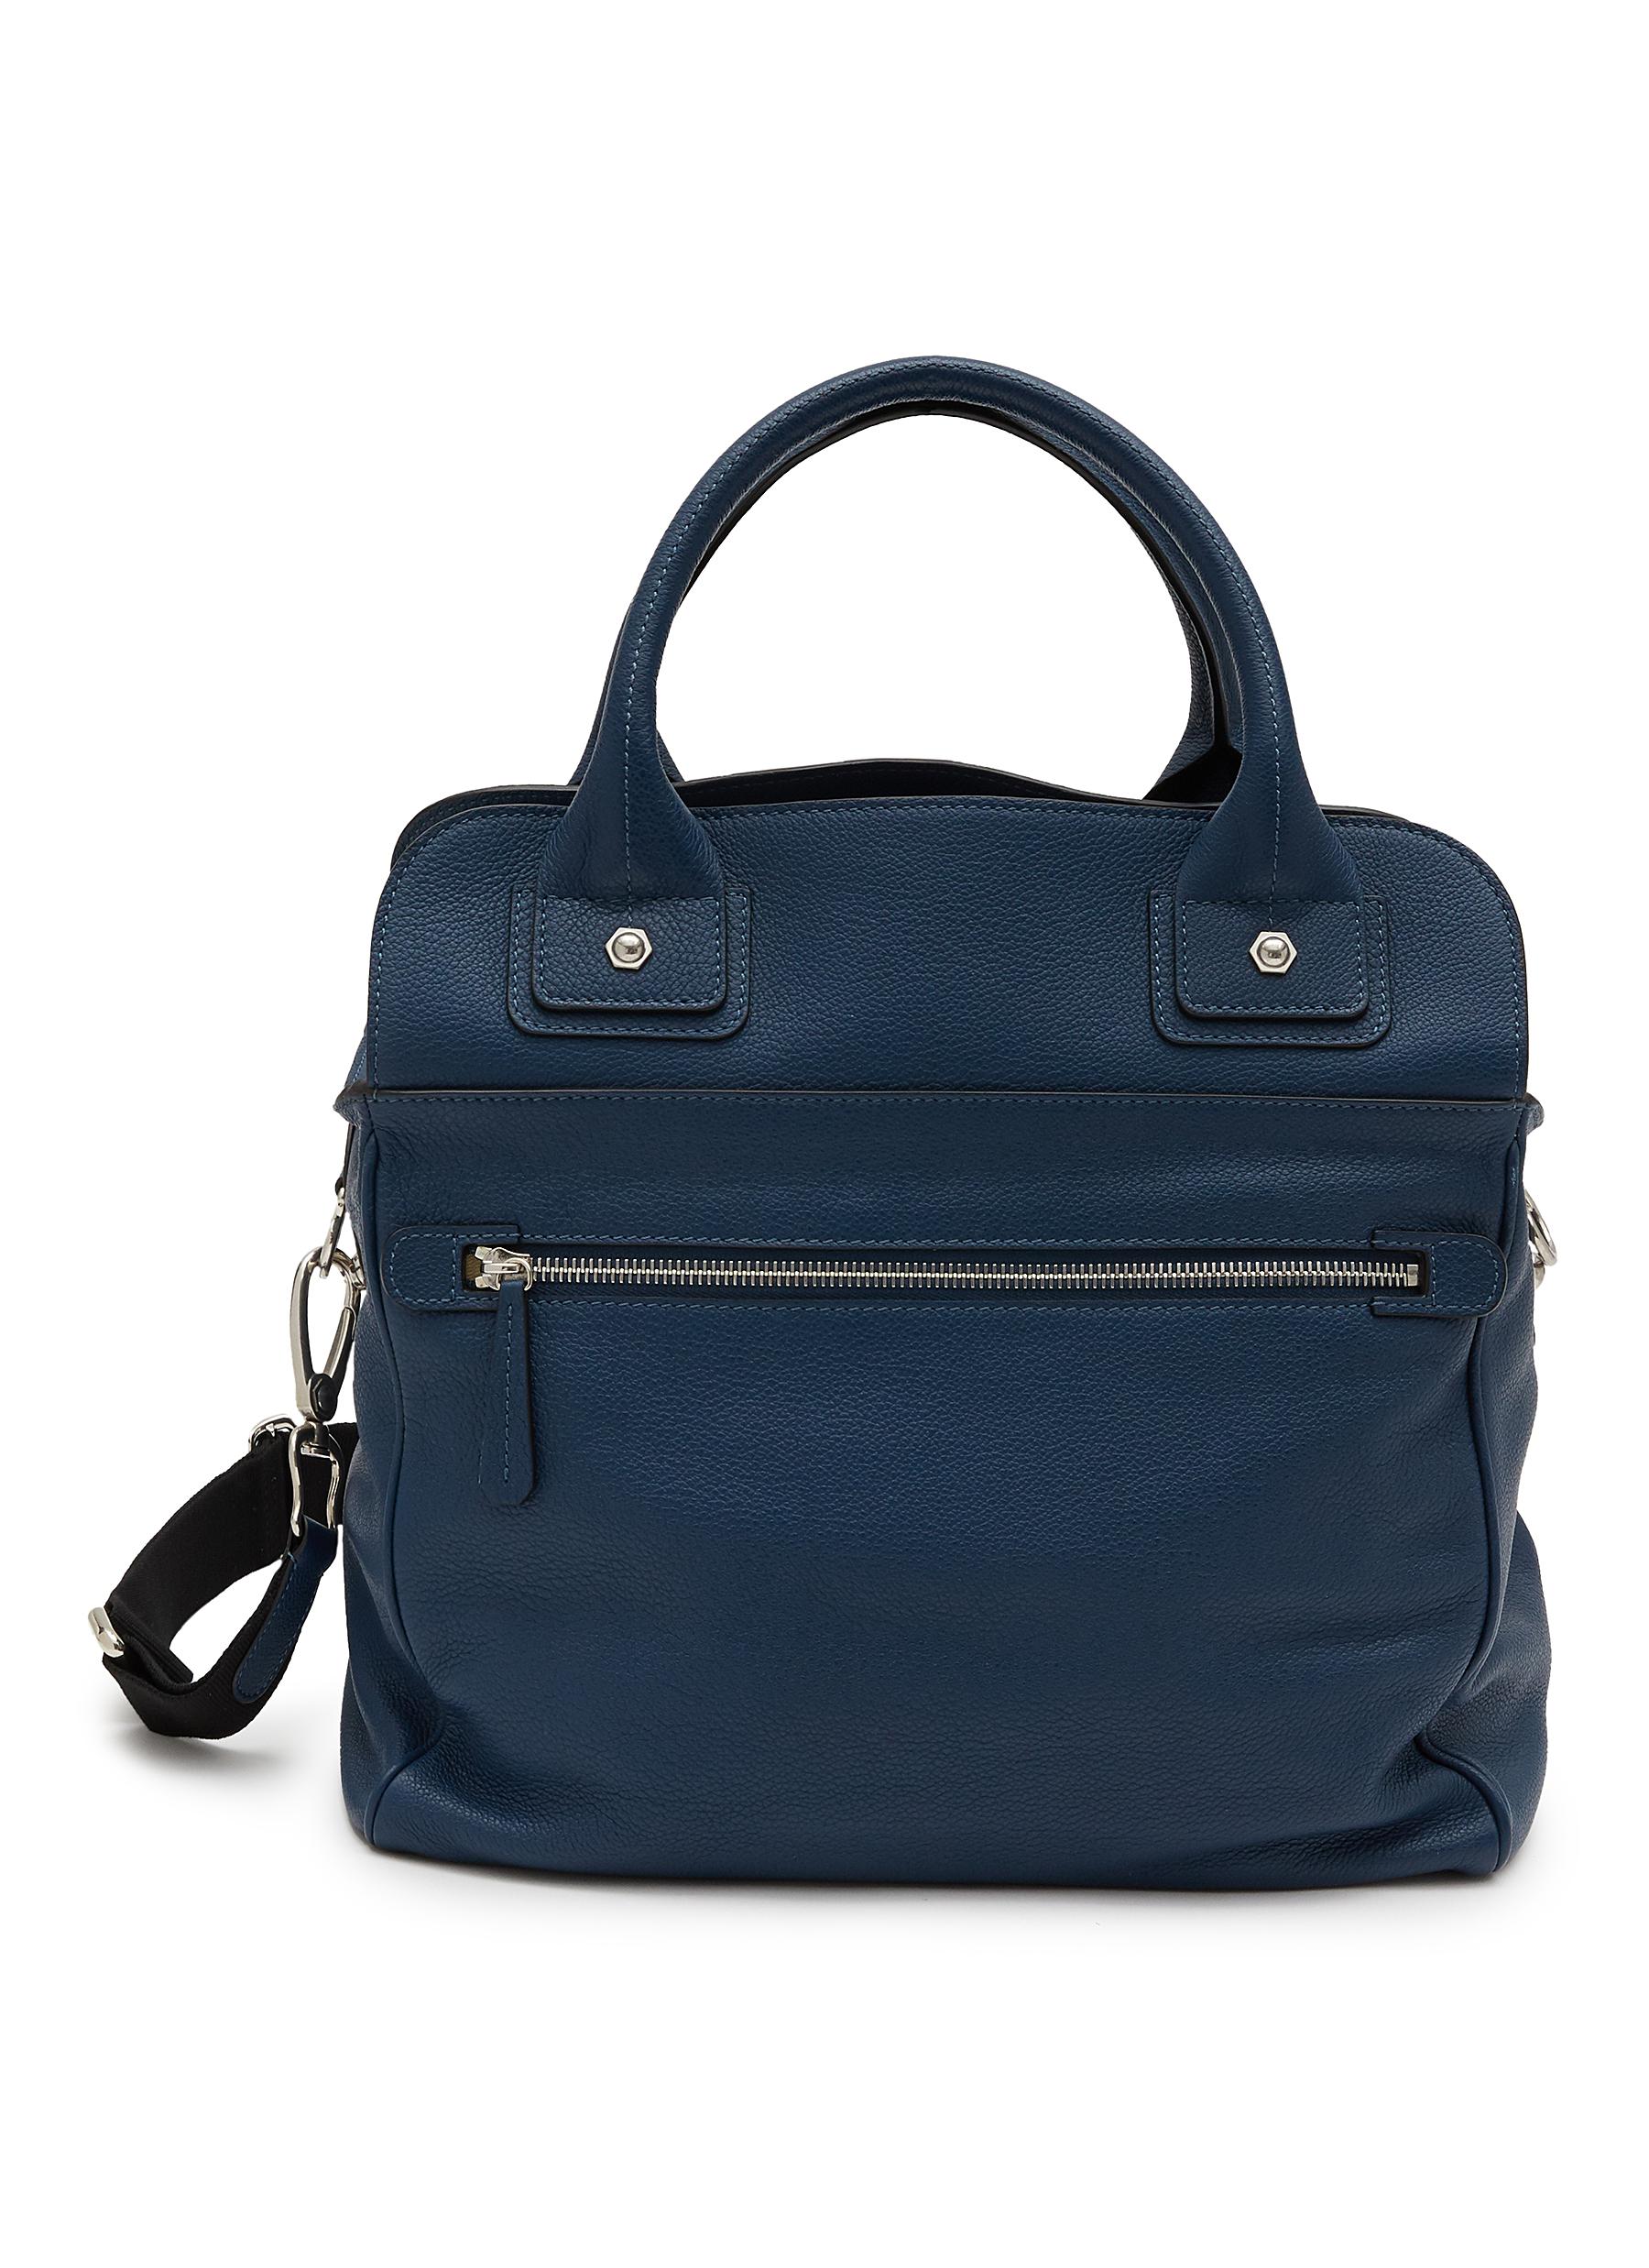 CONNOLLY | Small Sea Leather Bag 1985 | Men | Lane Crawford